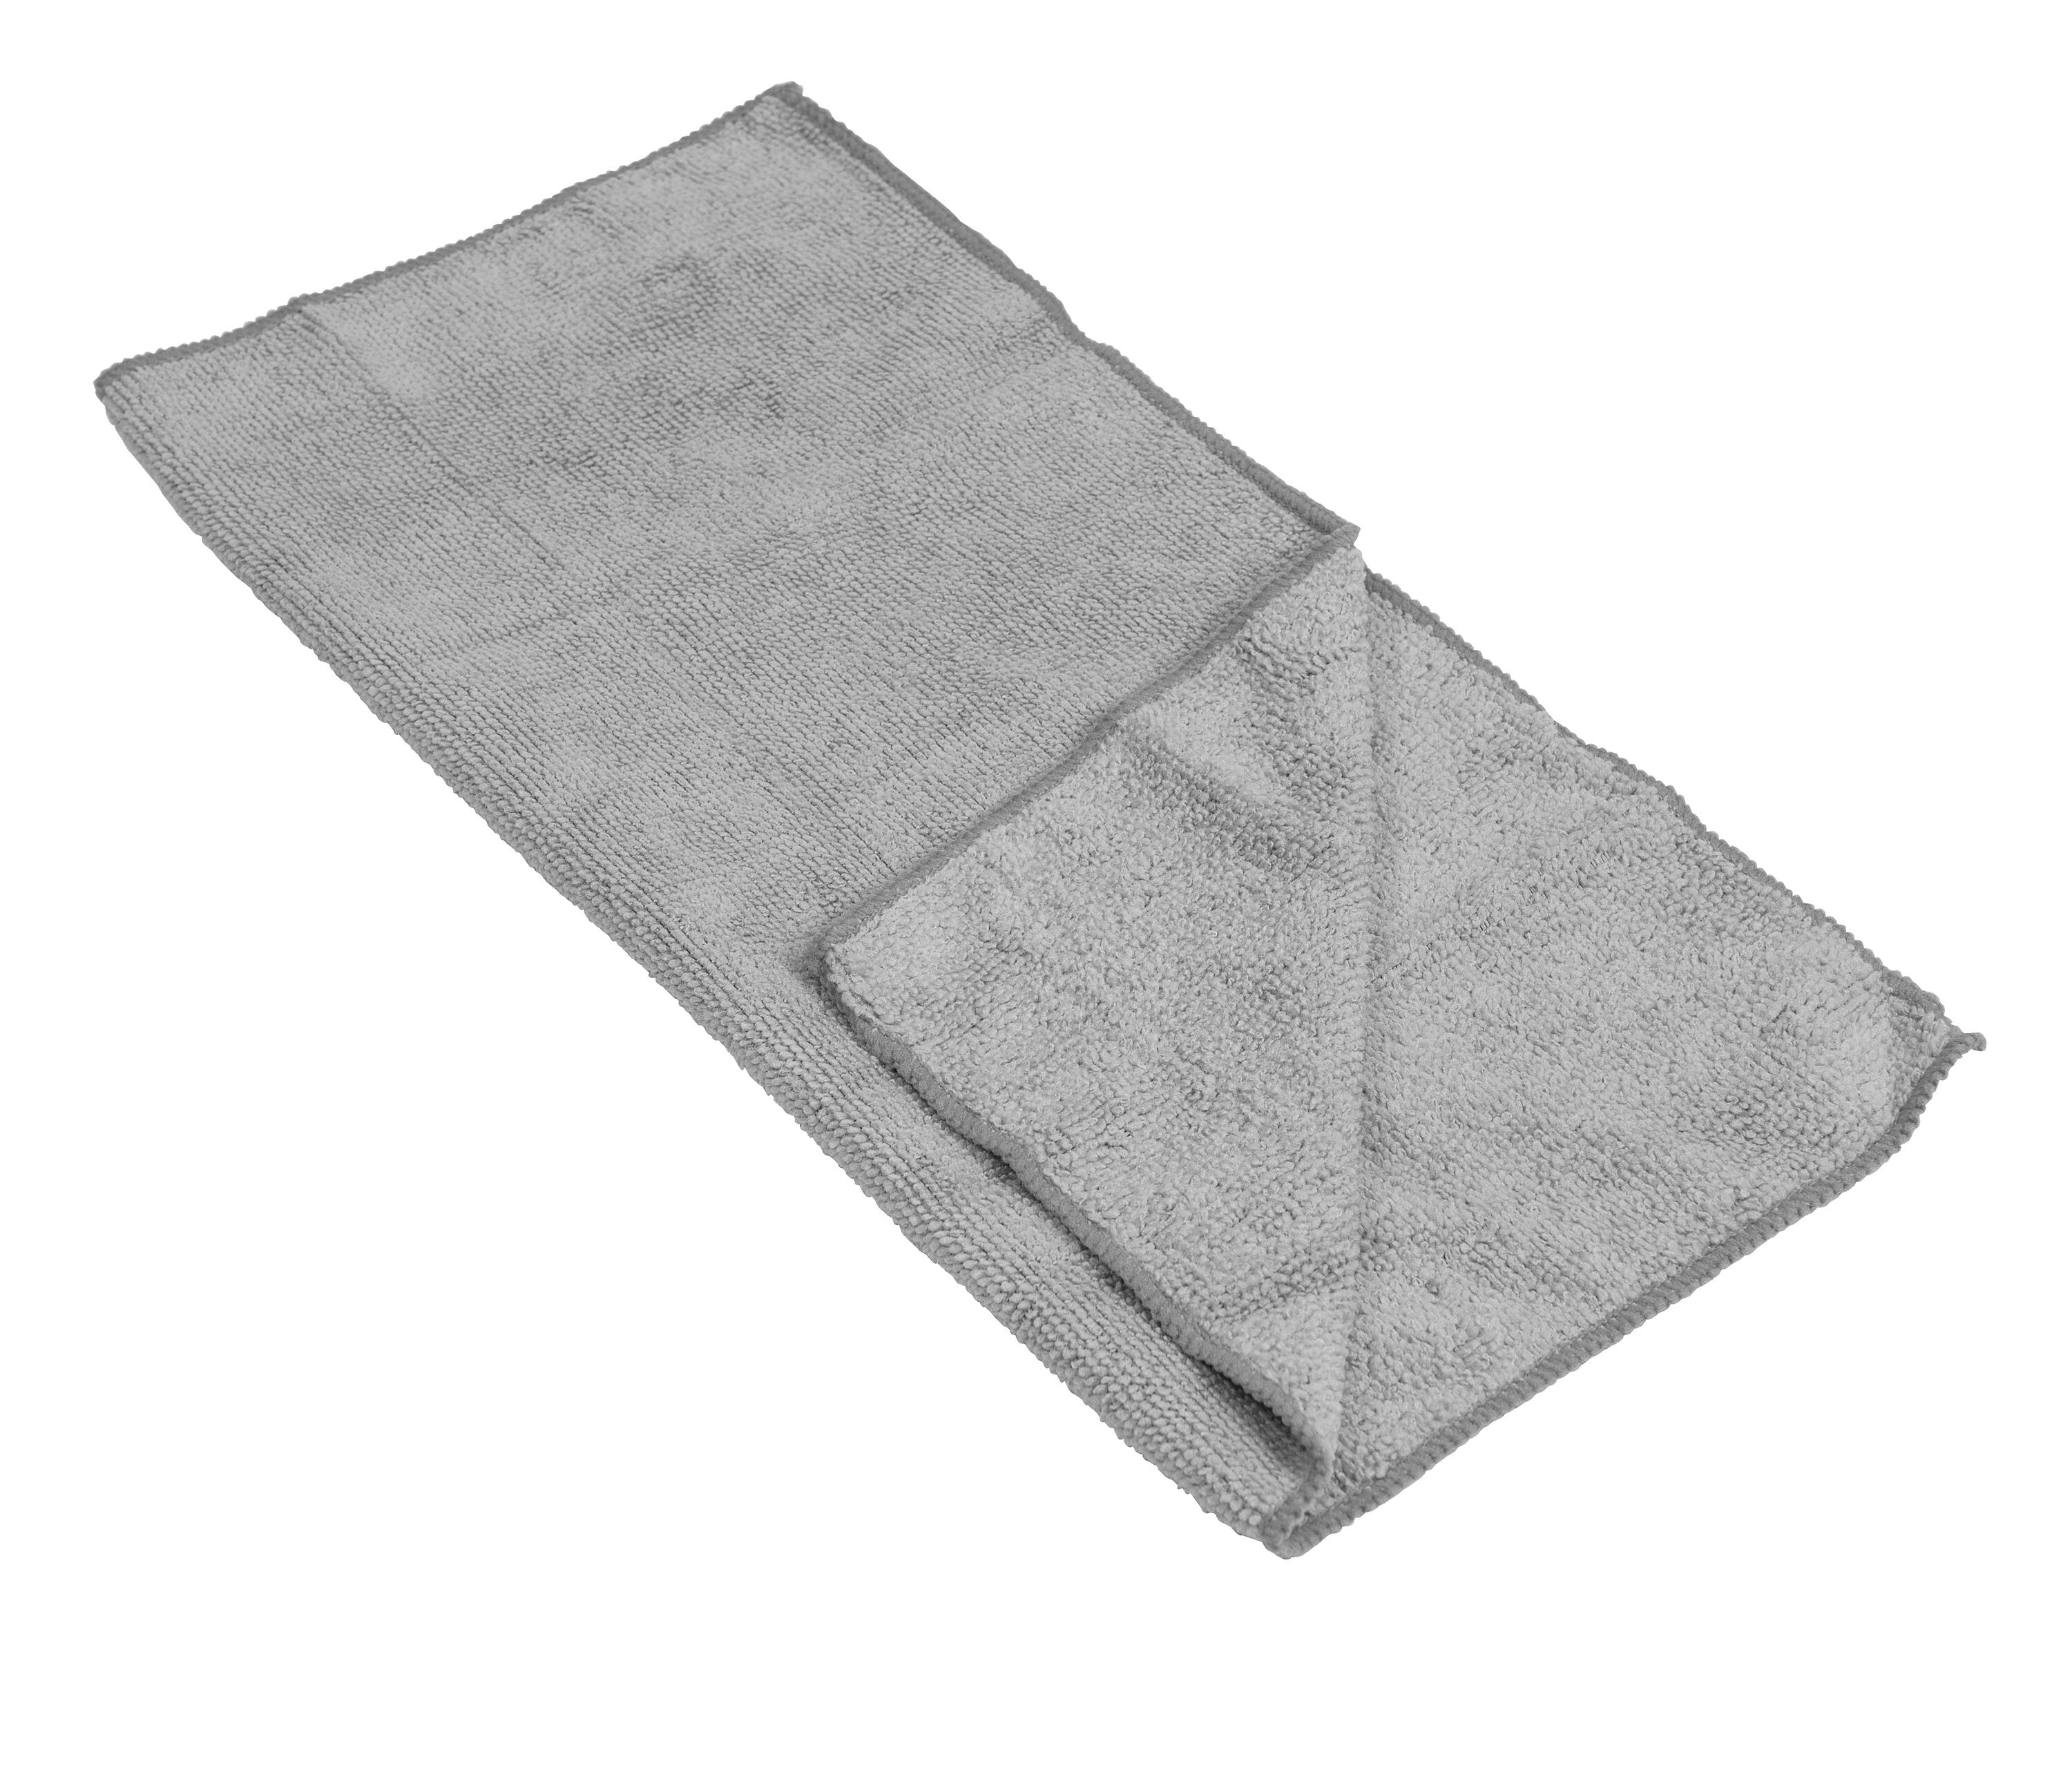 12 x 12 Microfiber Cleaning Cloths (50 Pack) - Reusable Towels